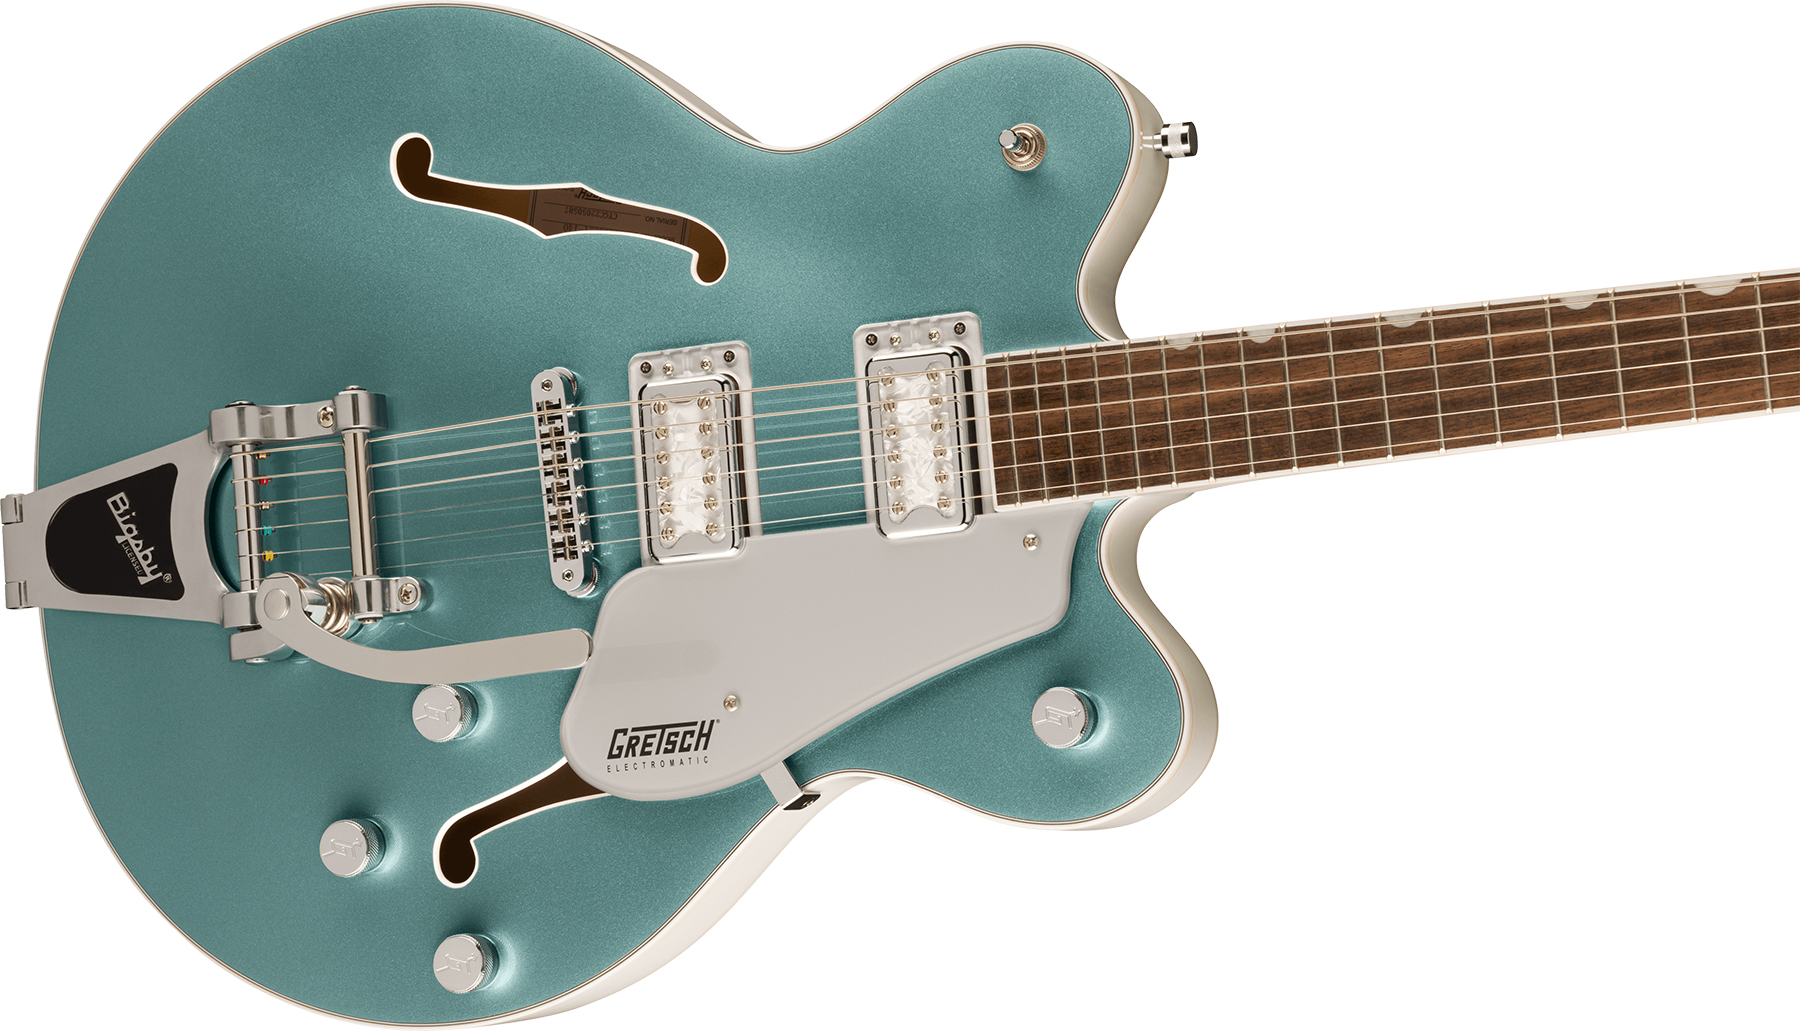 Gretsch G5622t-140 140th Double Platinum Center Block Bigsby Electromatic Hollow. 2h Trem Lau - Two-tone Stone / Pearl Platinum - Semi-hollow electric